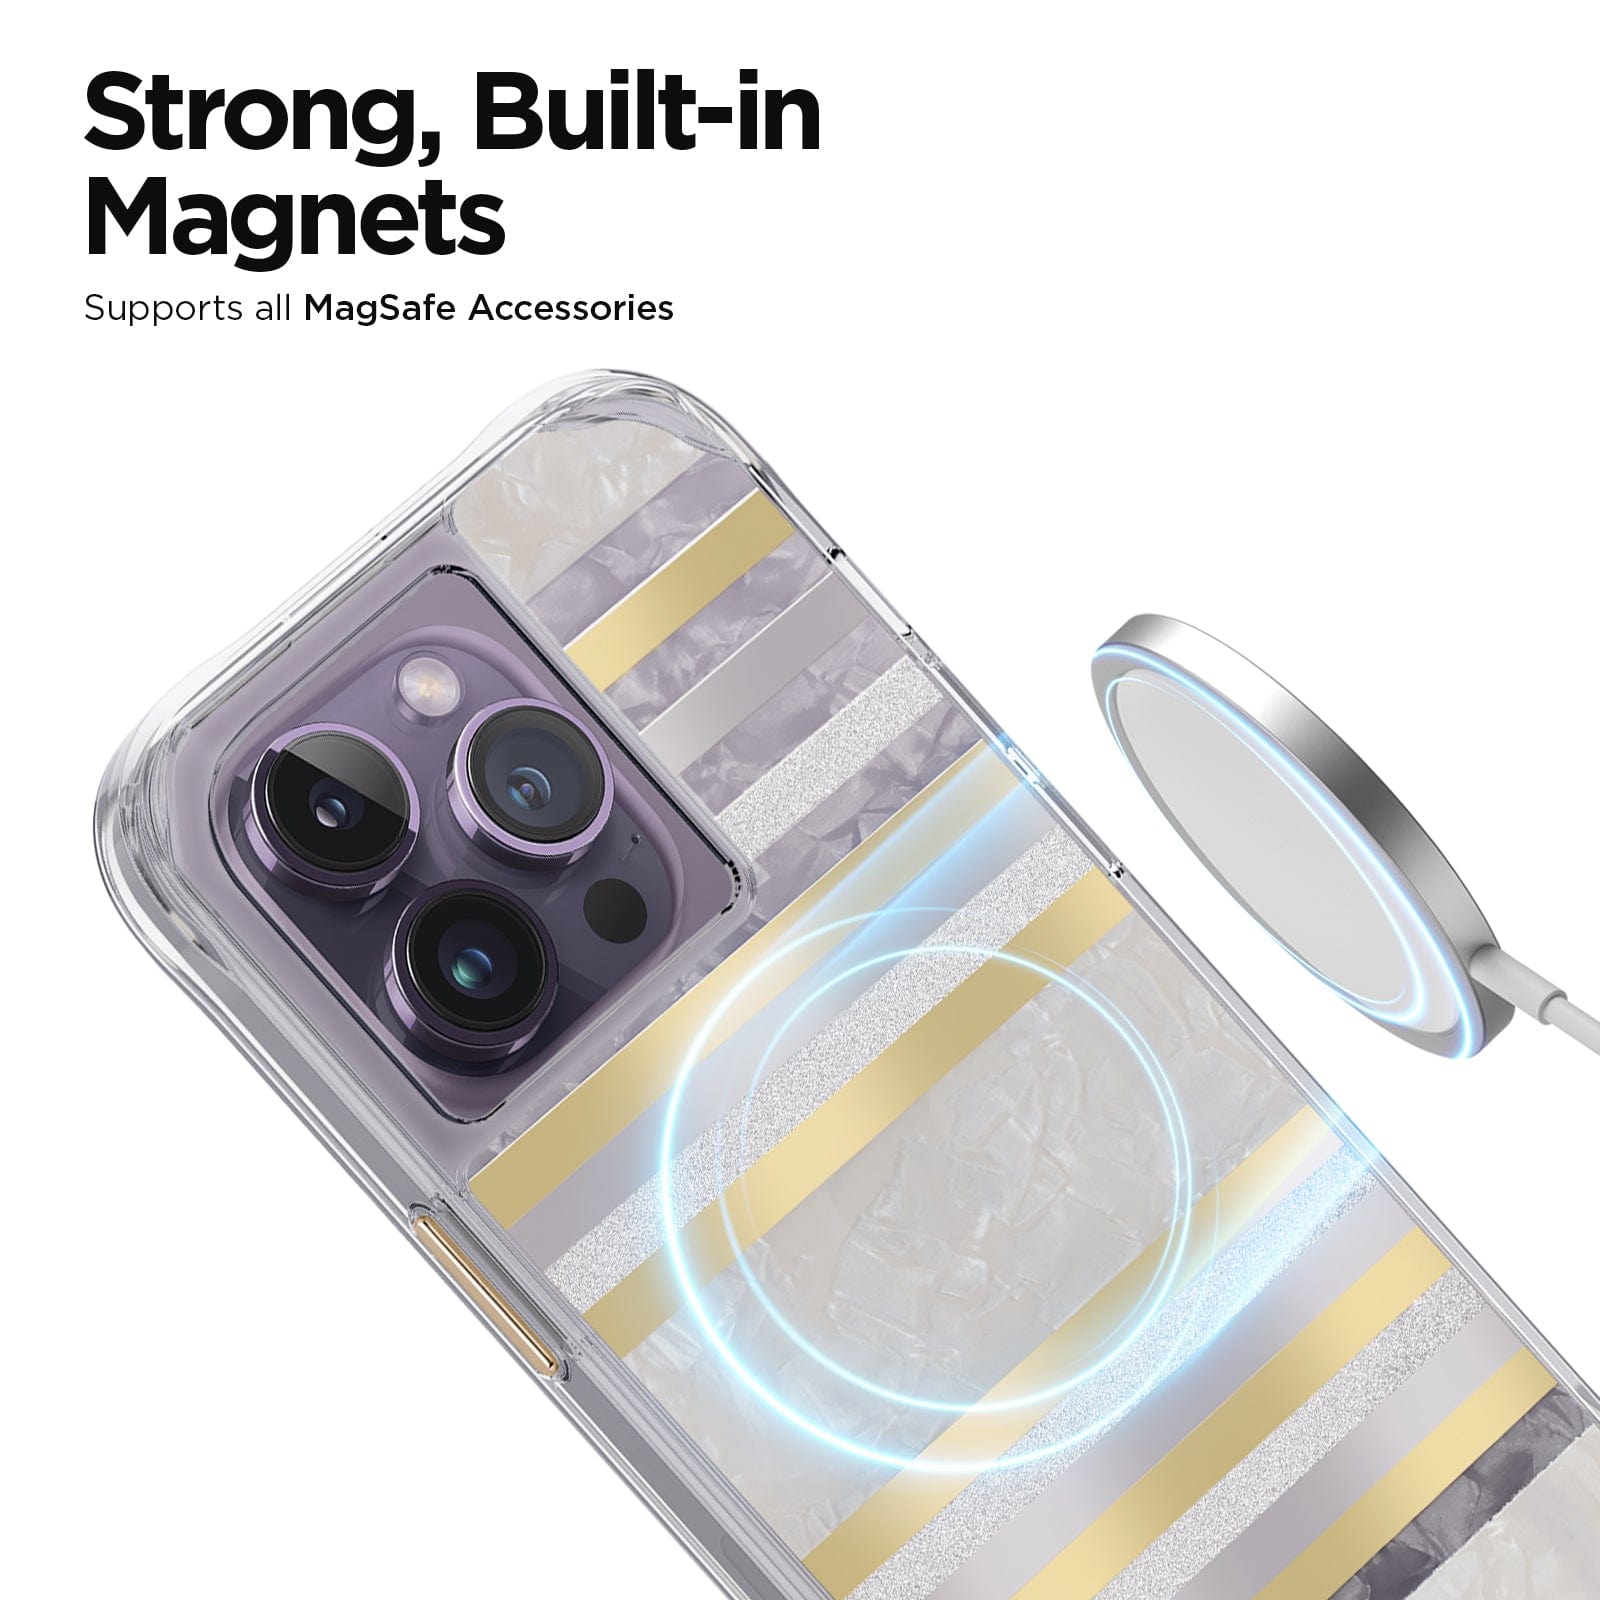 STRONG, BUILT-IN MAGNETS SUPPORTS ALL MAGSAFE ACCESSORIES.. 